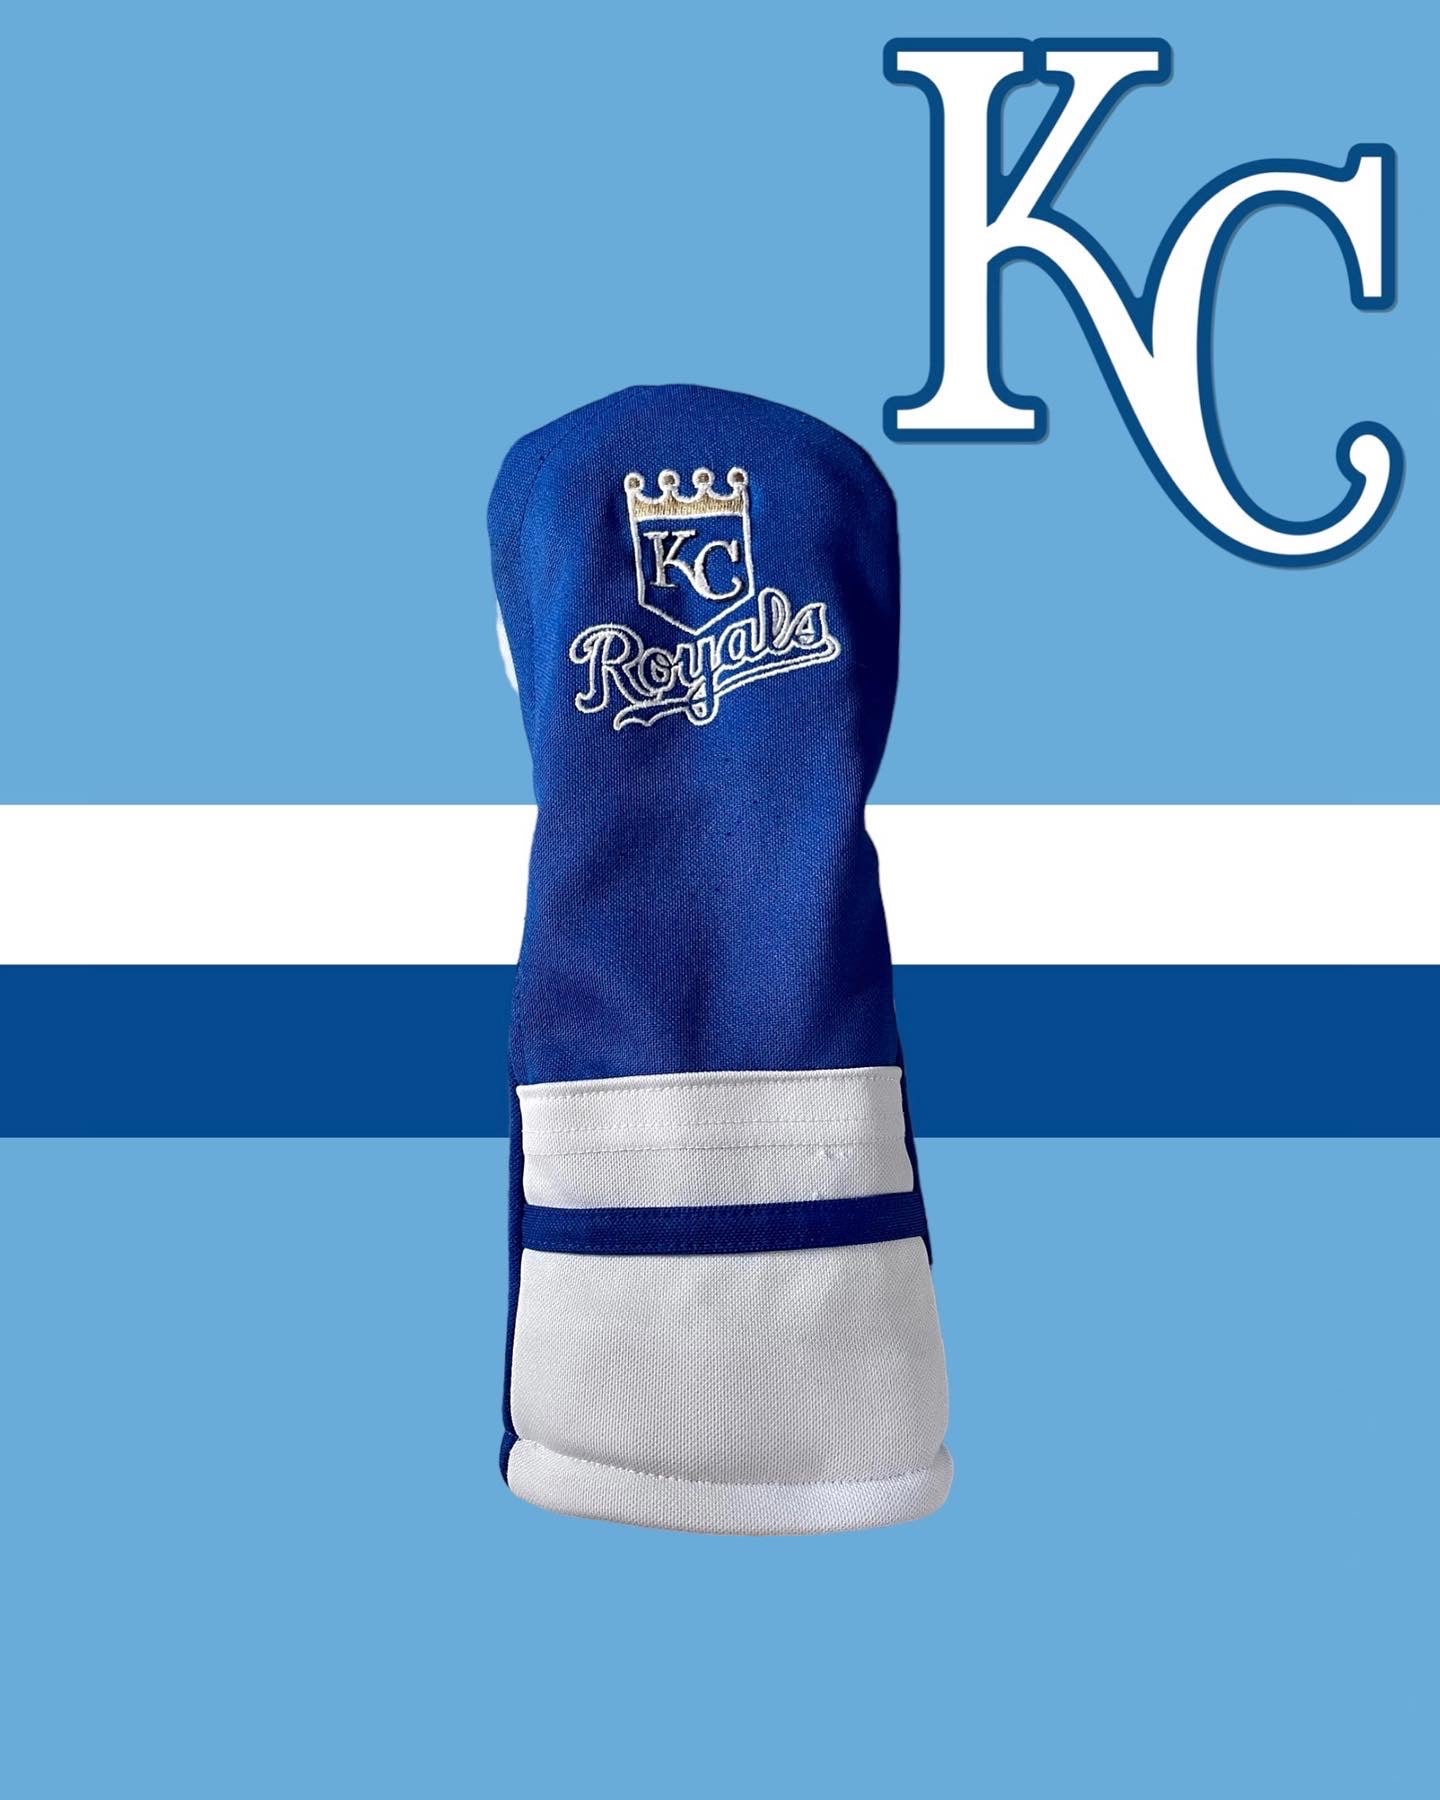 Kansas City Royals Fan Shop  Buy and Sell on SidelineSwap